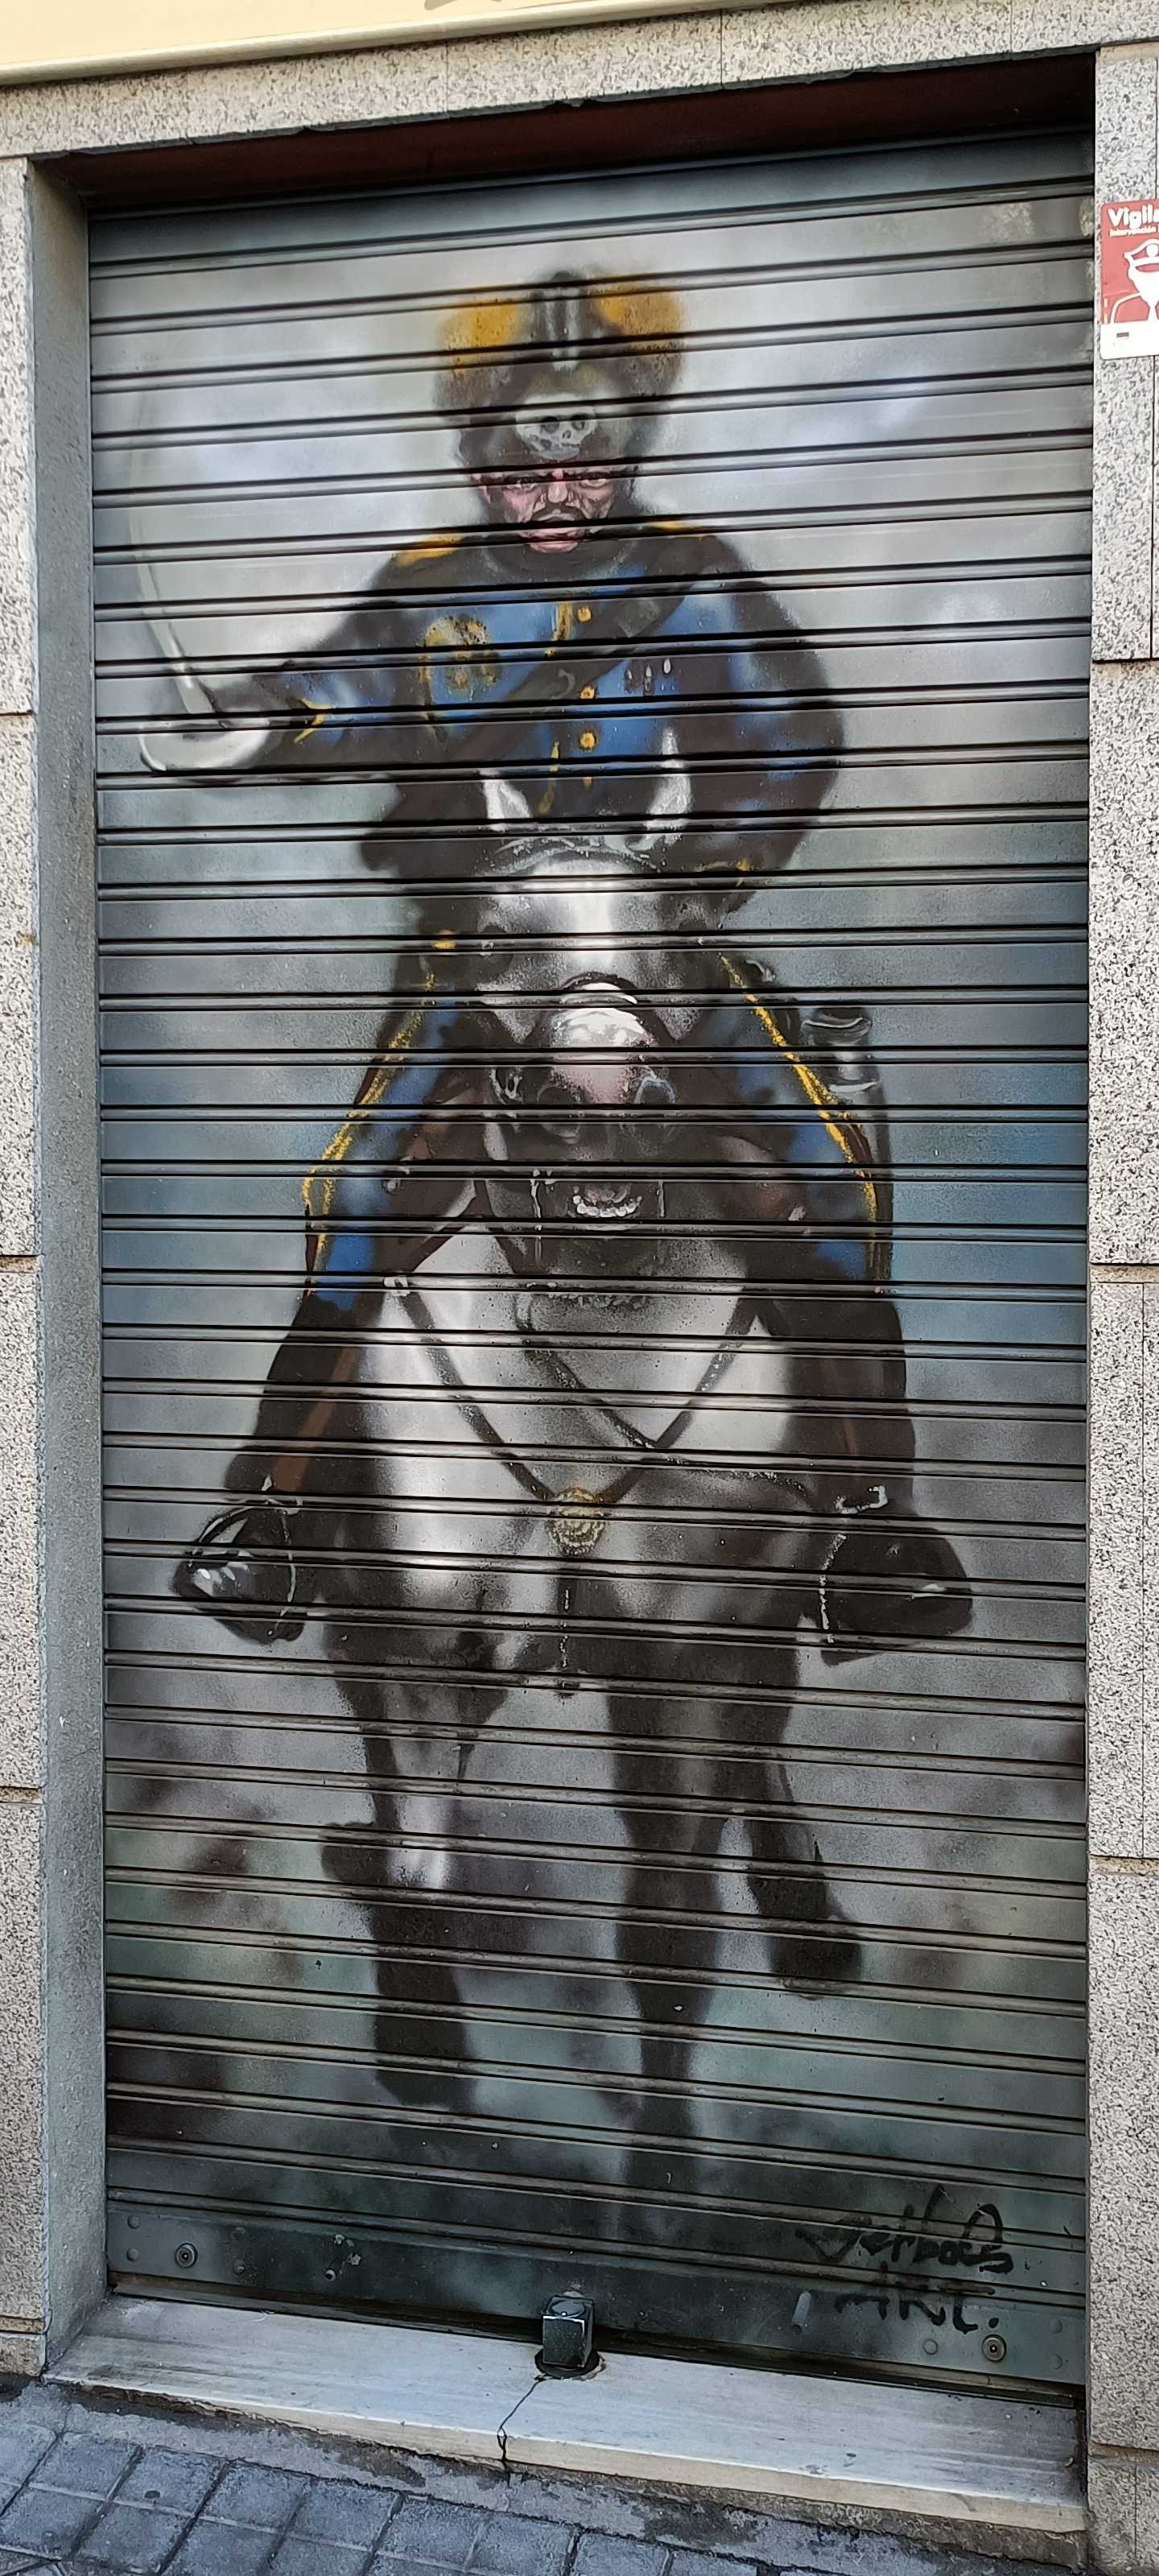 Graffiti 6764  captured by Rabot in Madrid Spain